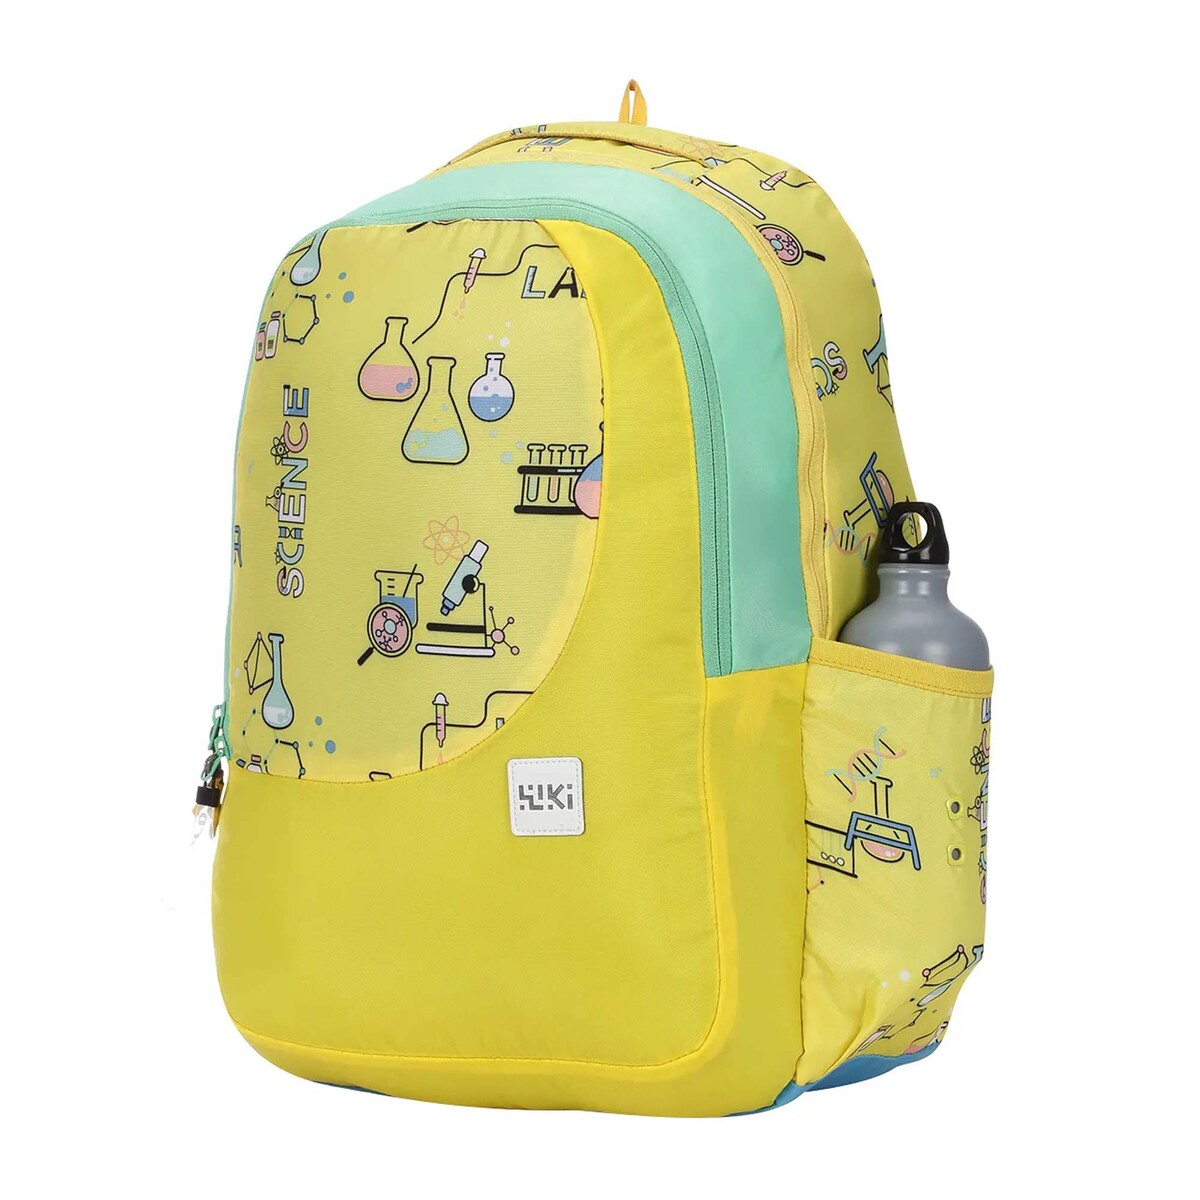 Wildcraft Wiki 1 Science School Bag Pack, 18 Inches, Yellow